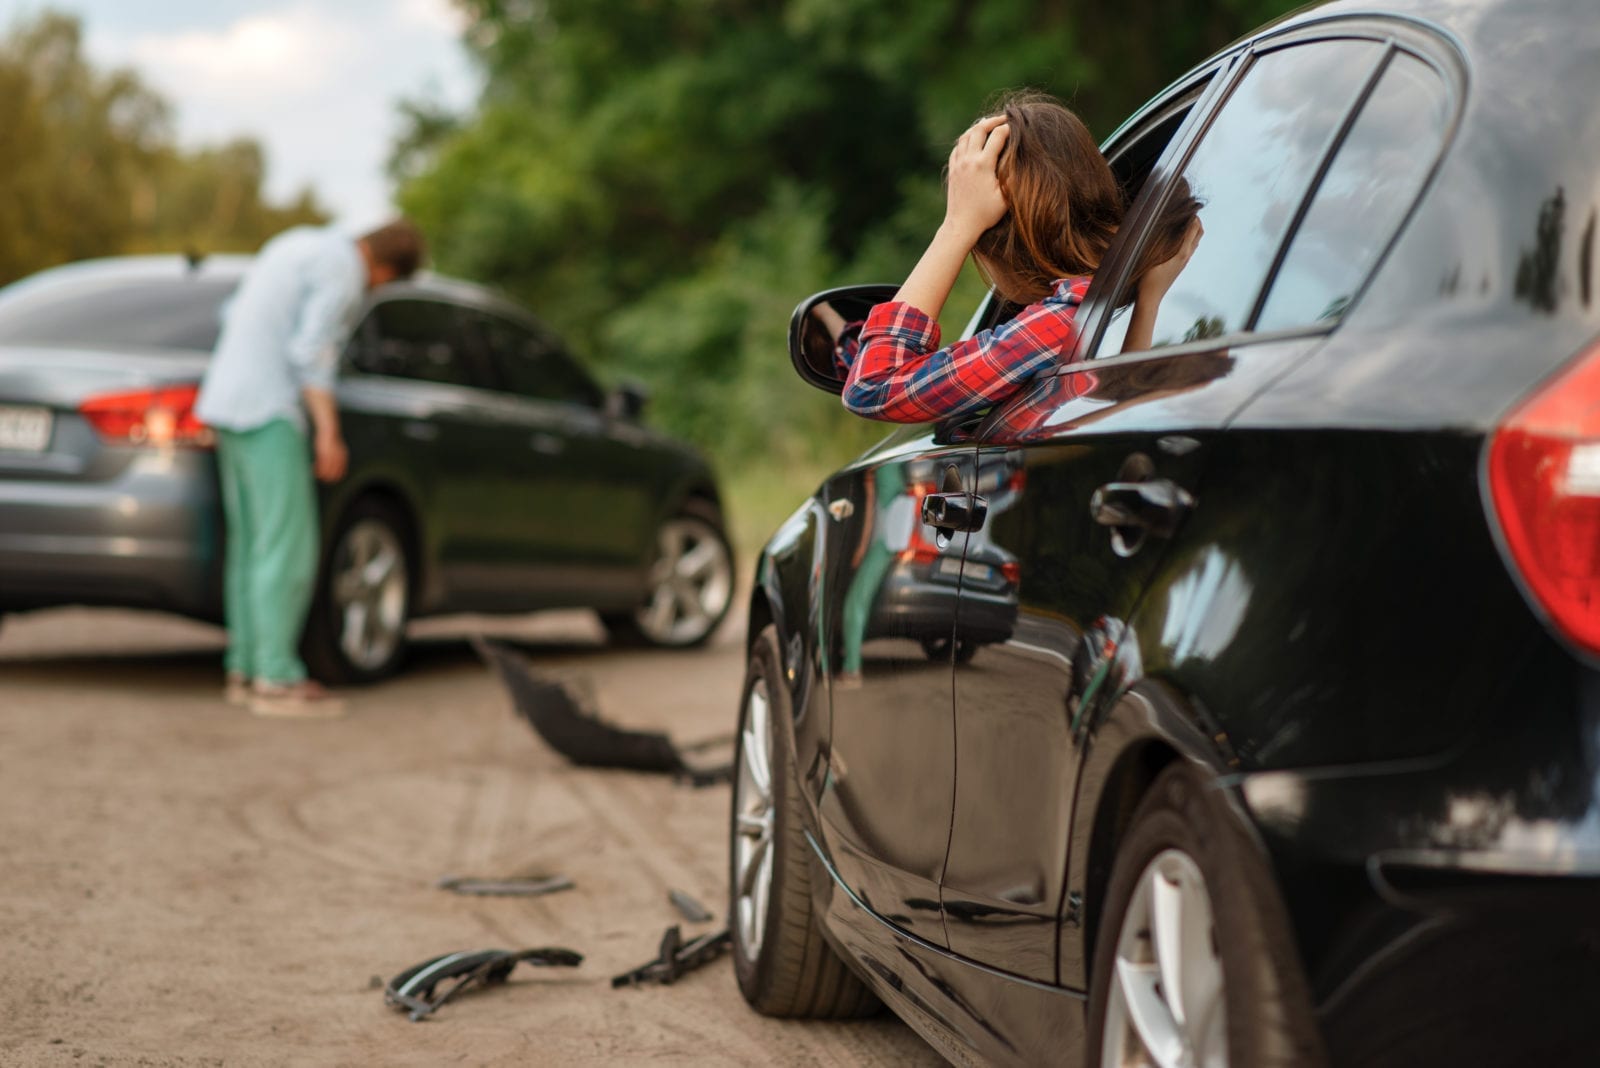 What to do after a Car Accident